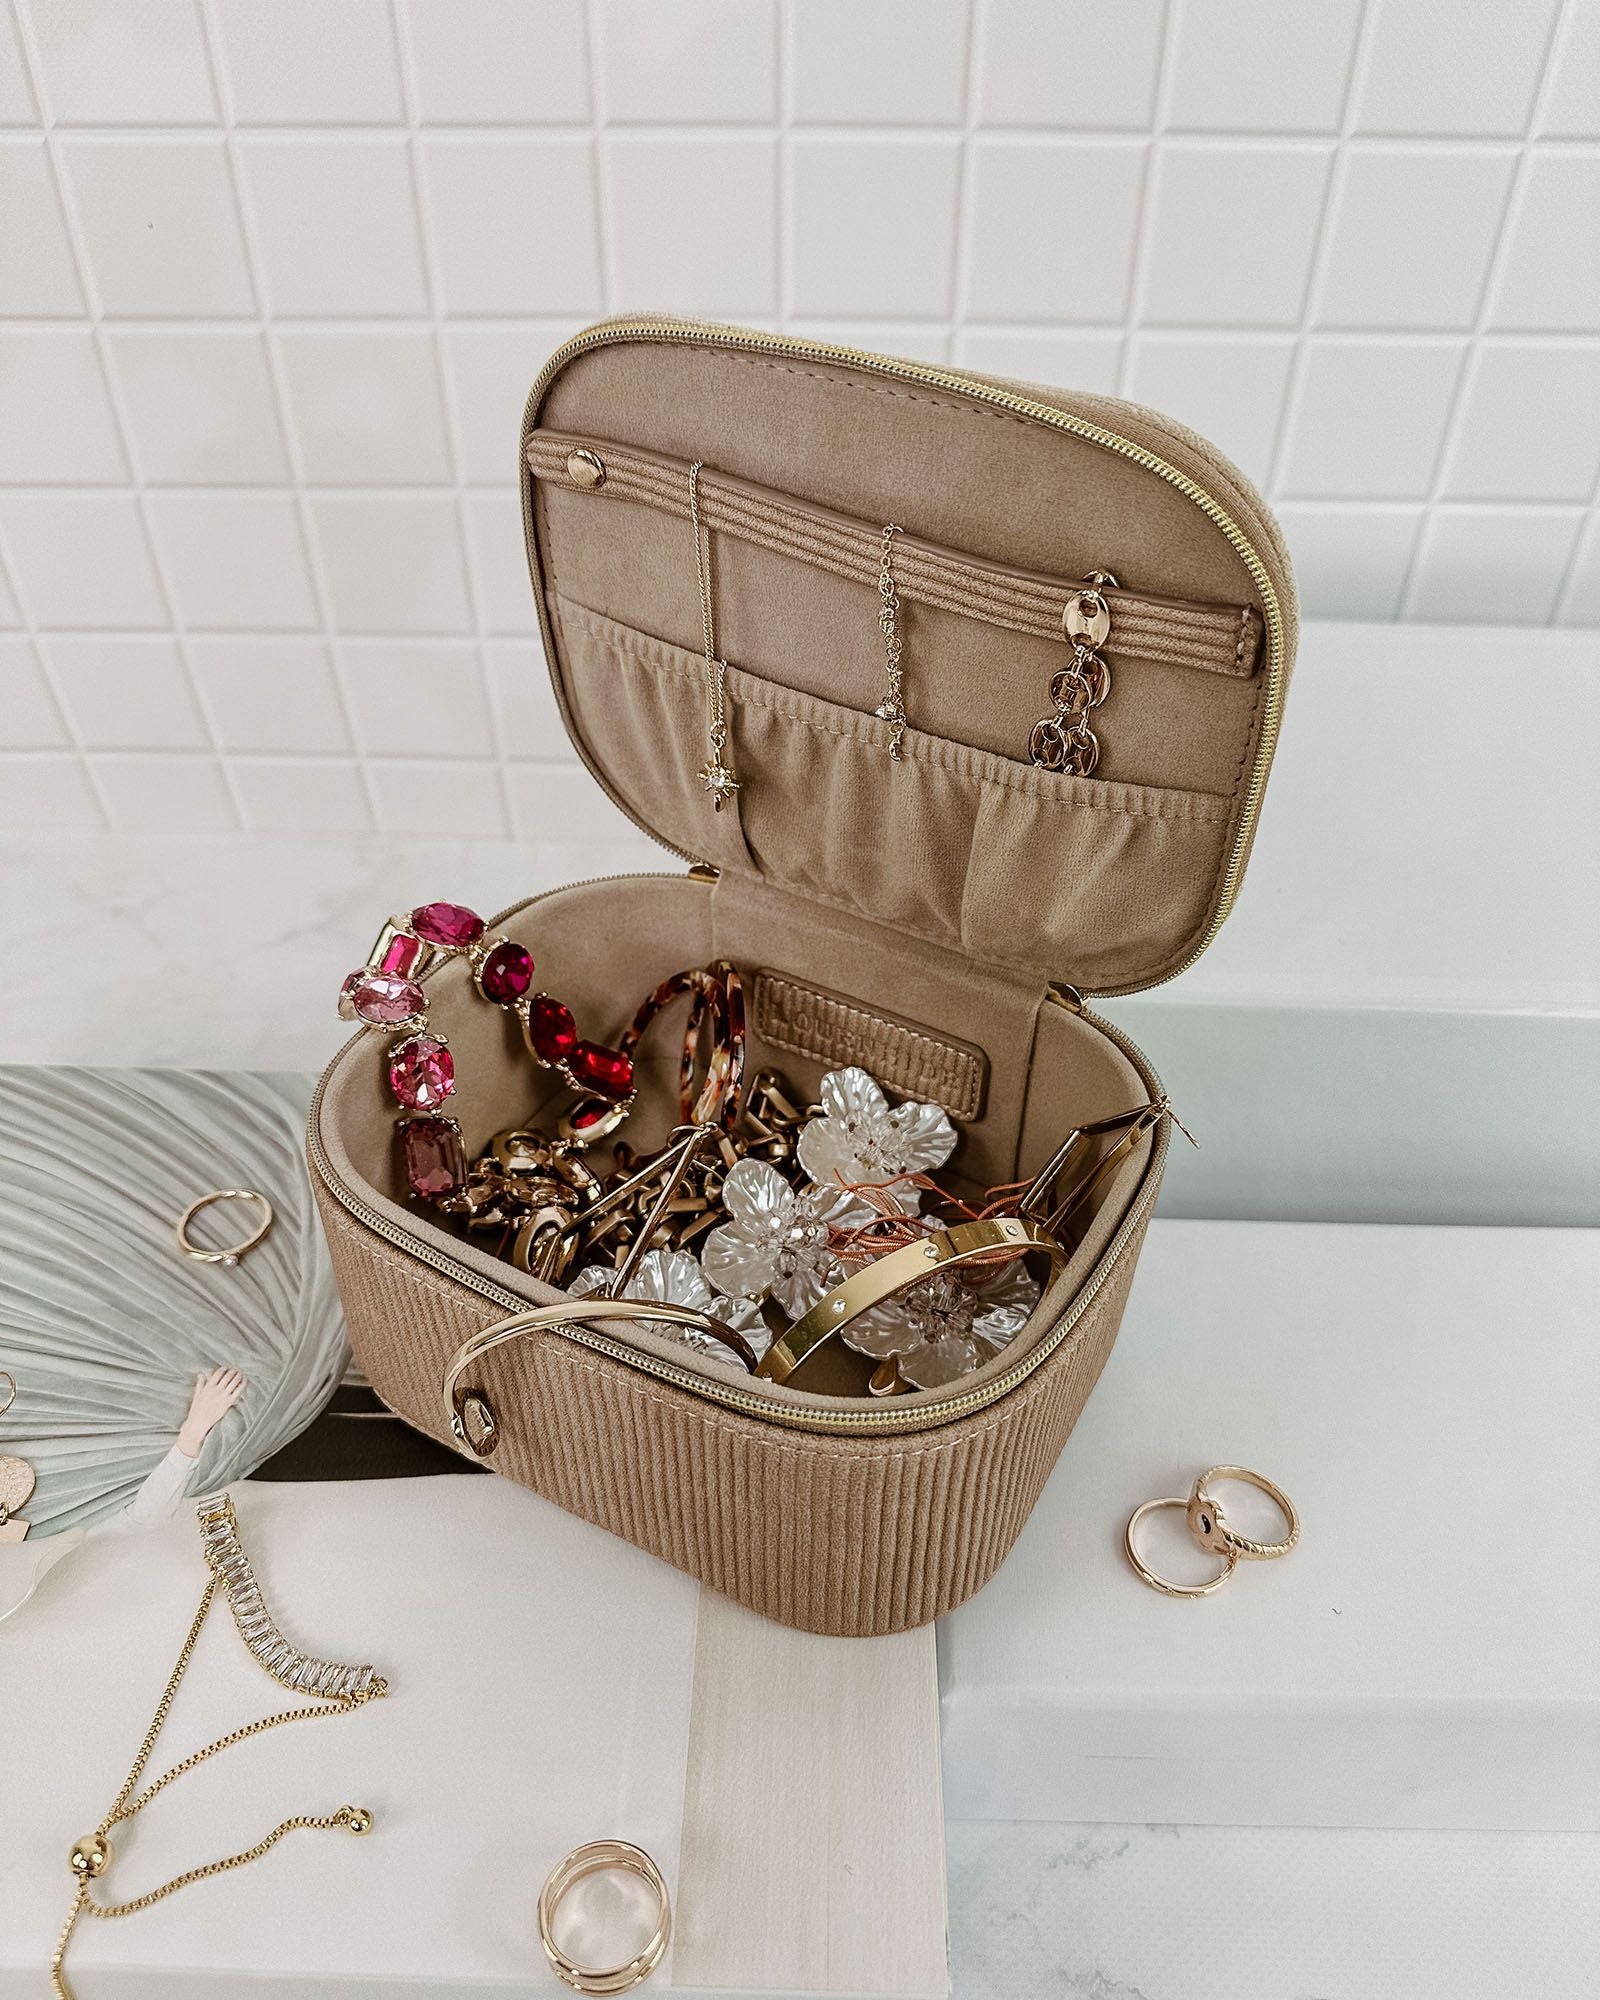 The Louenhide Jesse Jewelry Case is a medium size, rectangular jewelry case designed to go wherever you go.